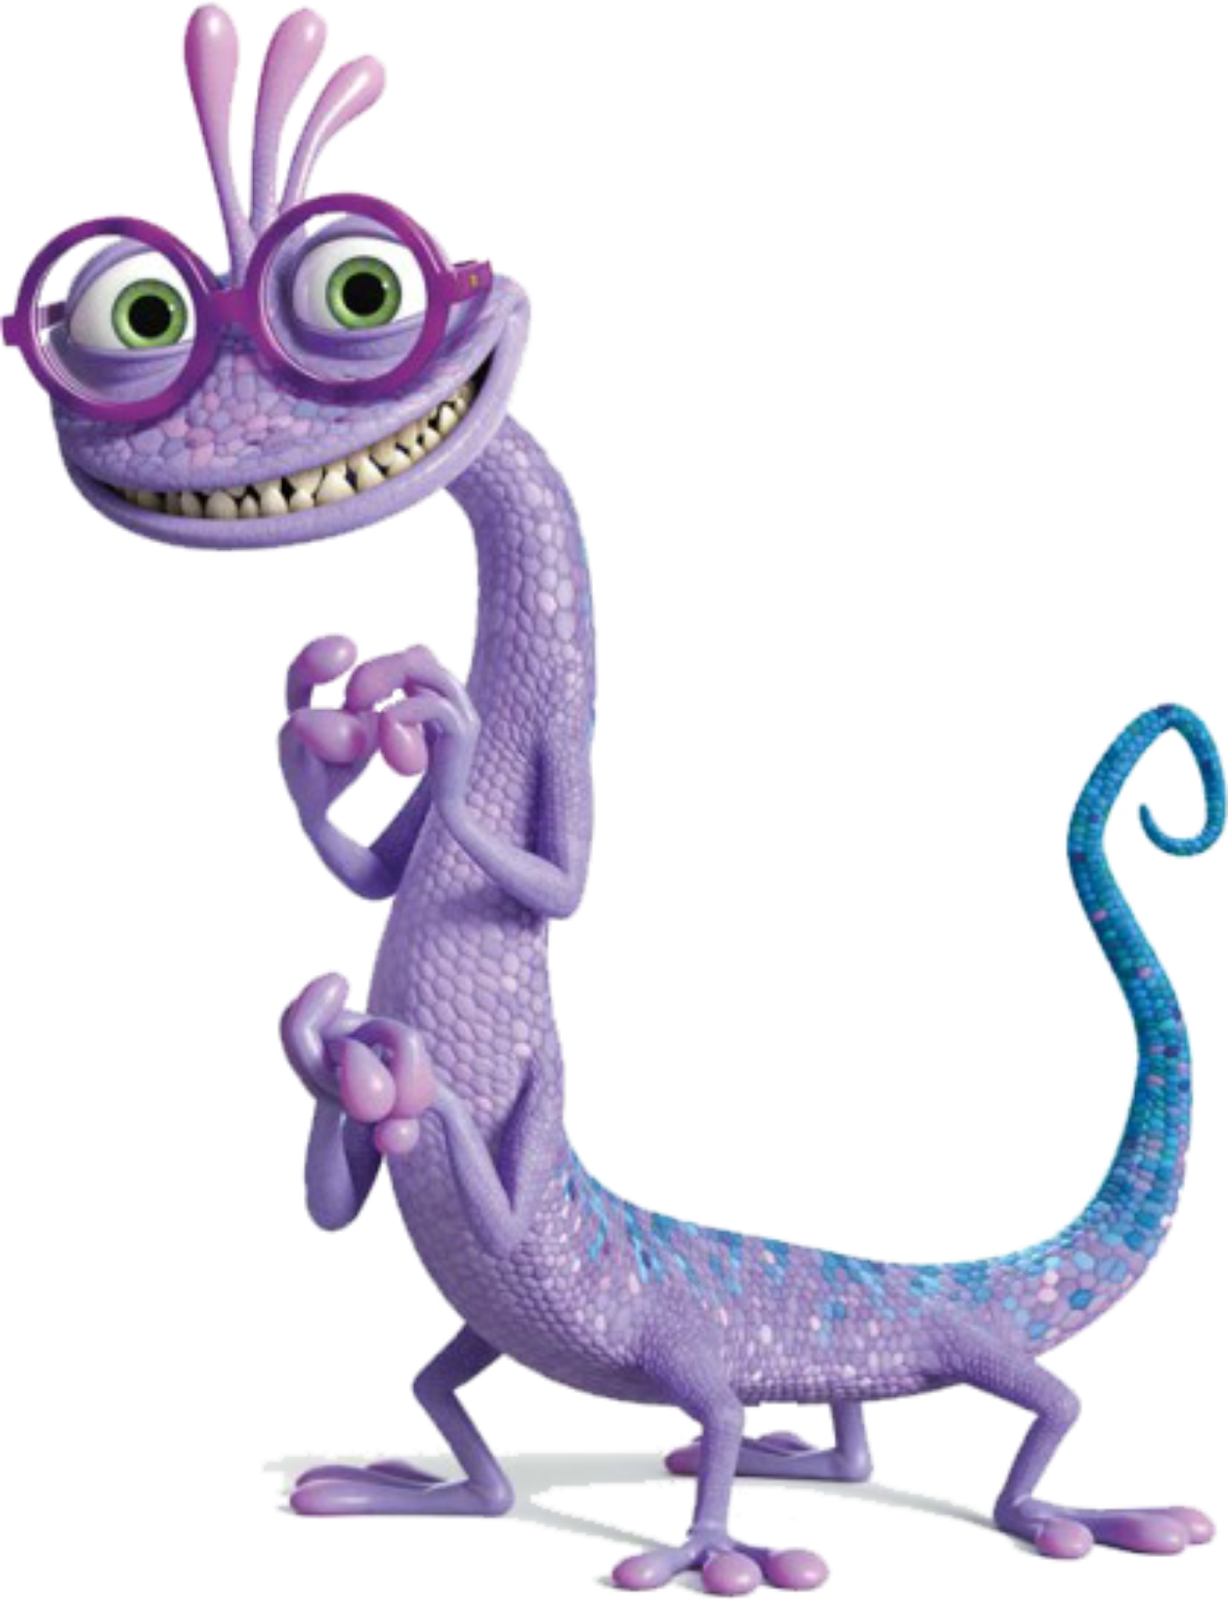 High-Quality Purple Lizard Inc With Monsters Glasses PNG Image